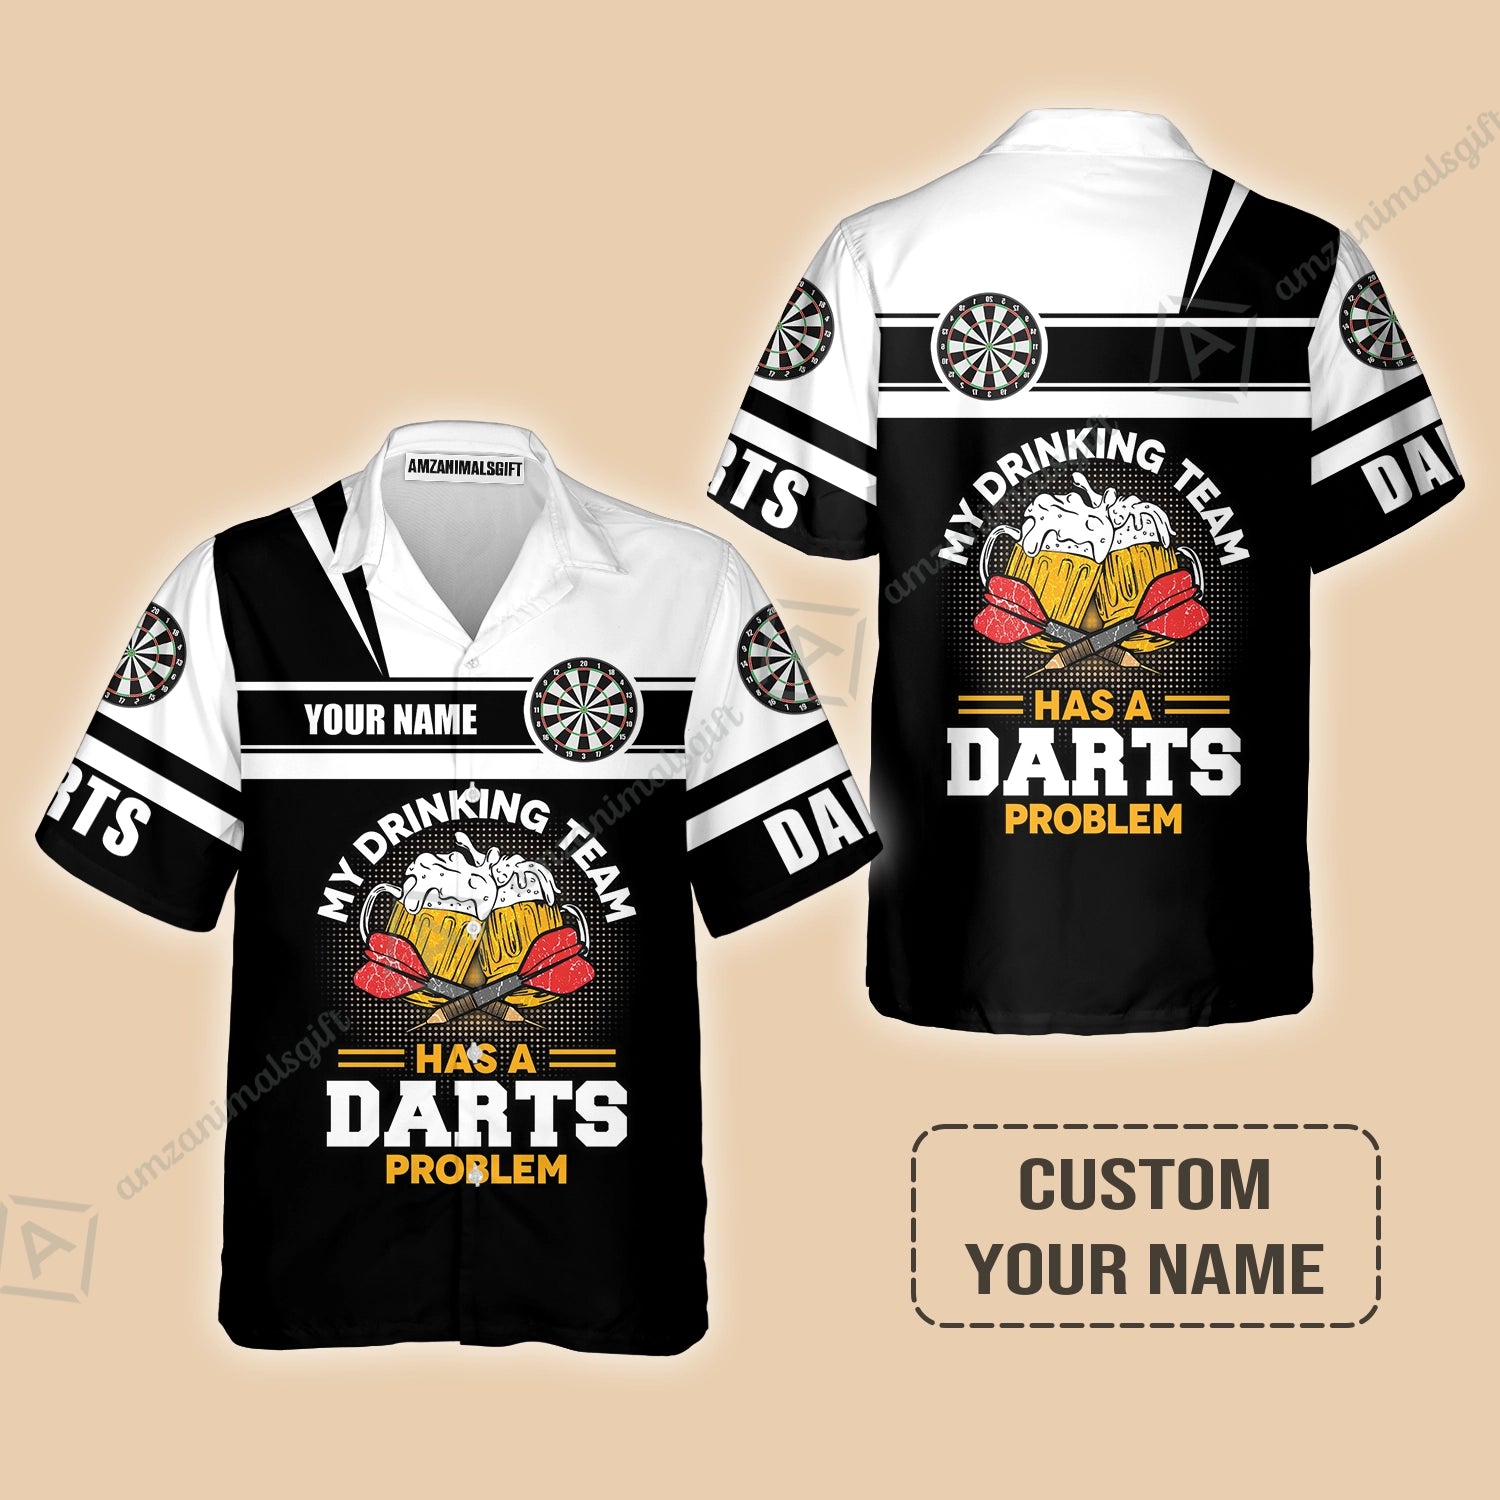 Personalized Darts Hawaiian Shirt, My Drinking Team Has Darts Problem Shirt For Men And Women, Perfect Outfit For Darts Lovers, Darts Players